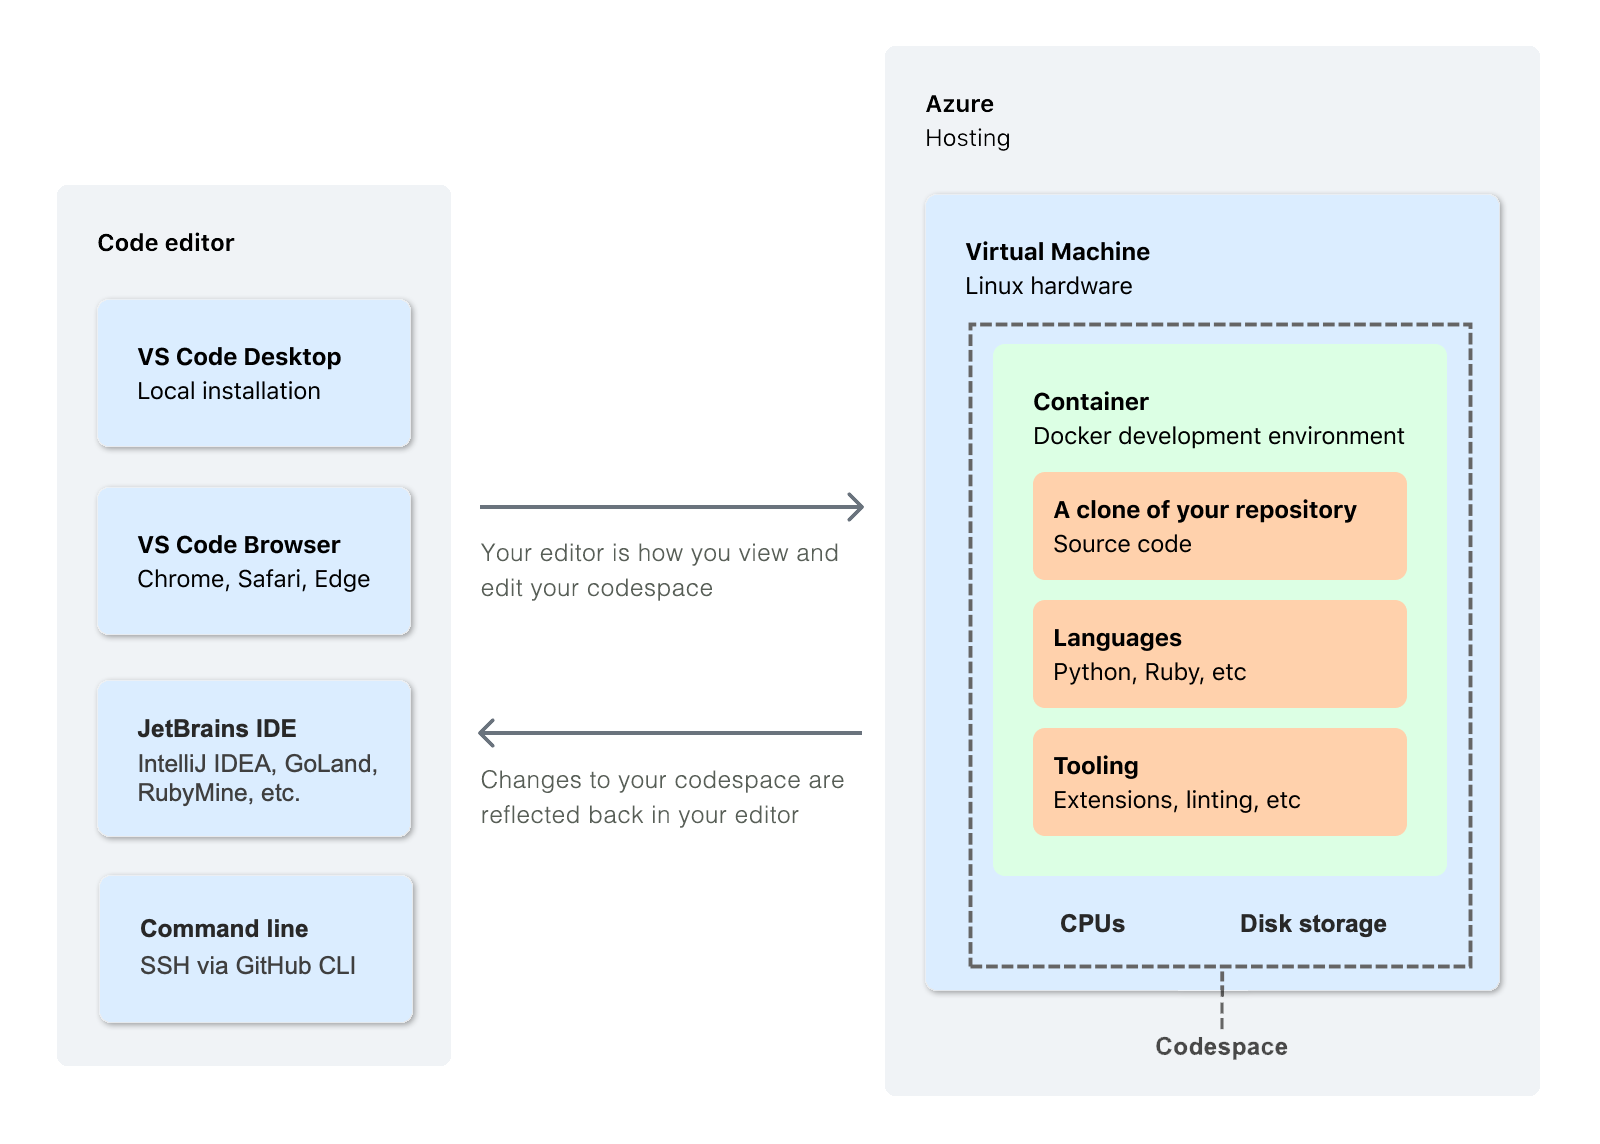 Diagram showing the relationship between a code editor and a codespace running on an Azure virtual machine.